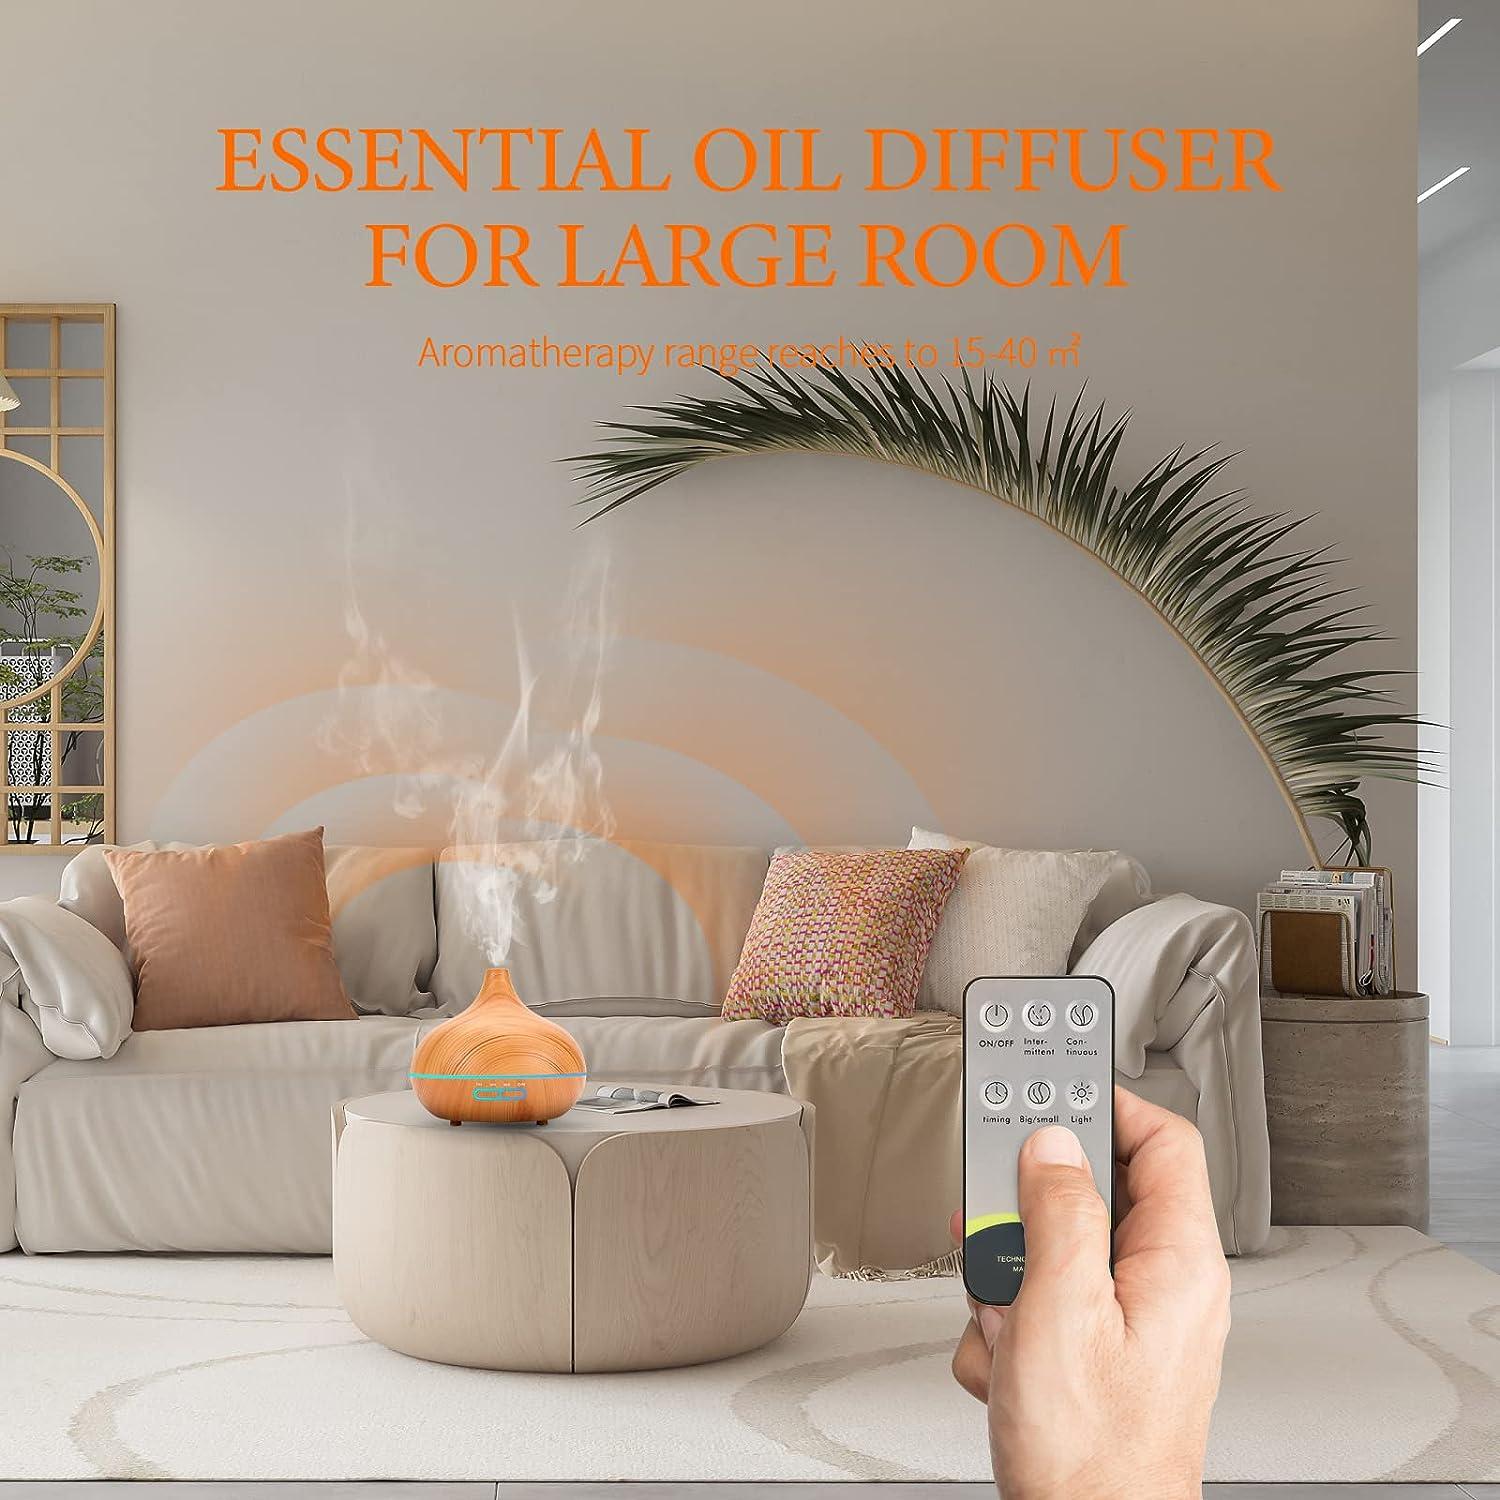 SACATR Diffusers for Essential Oils Large Room, 550ml Essential Oil Diffusers with 15x10mL Essential Oils, Aromatherapy Diffuser,Humidifiers for